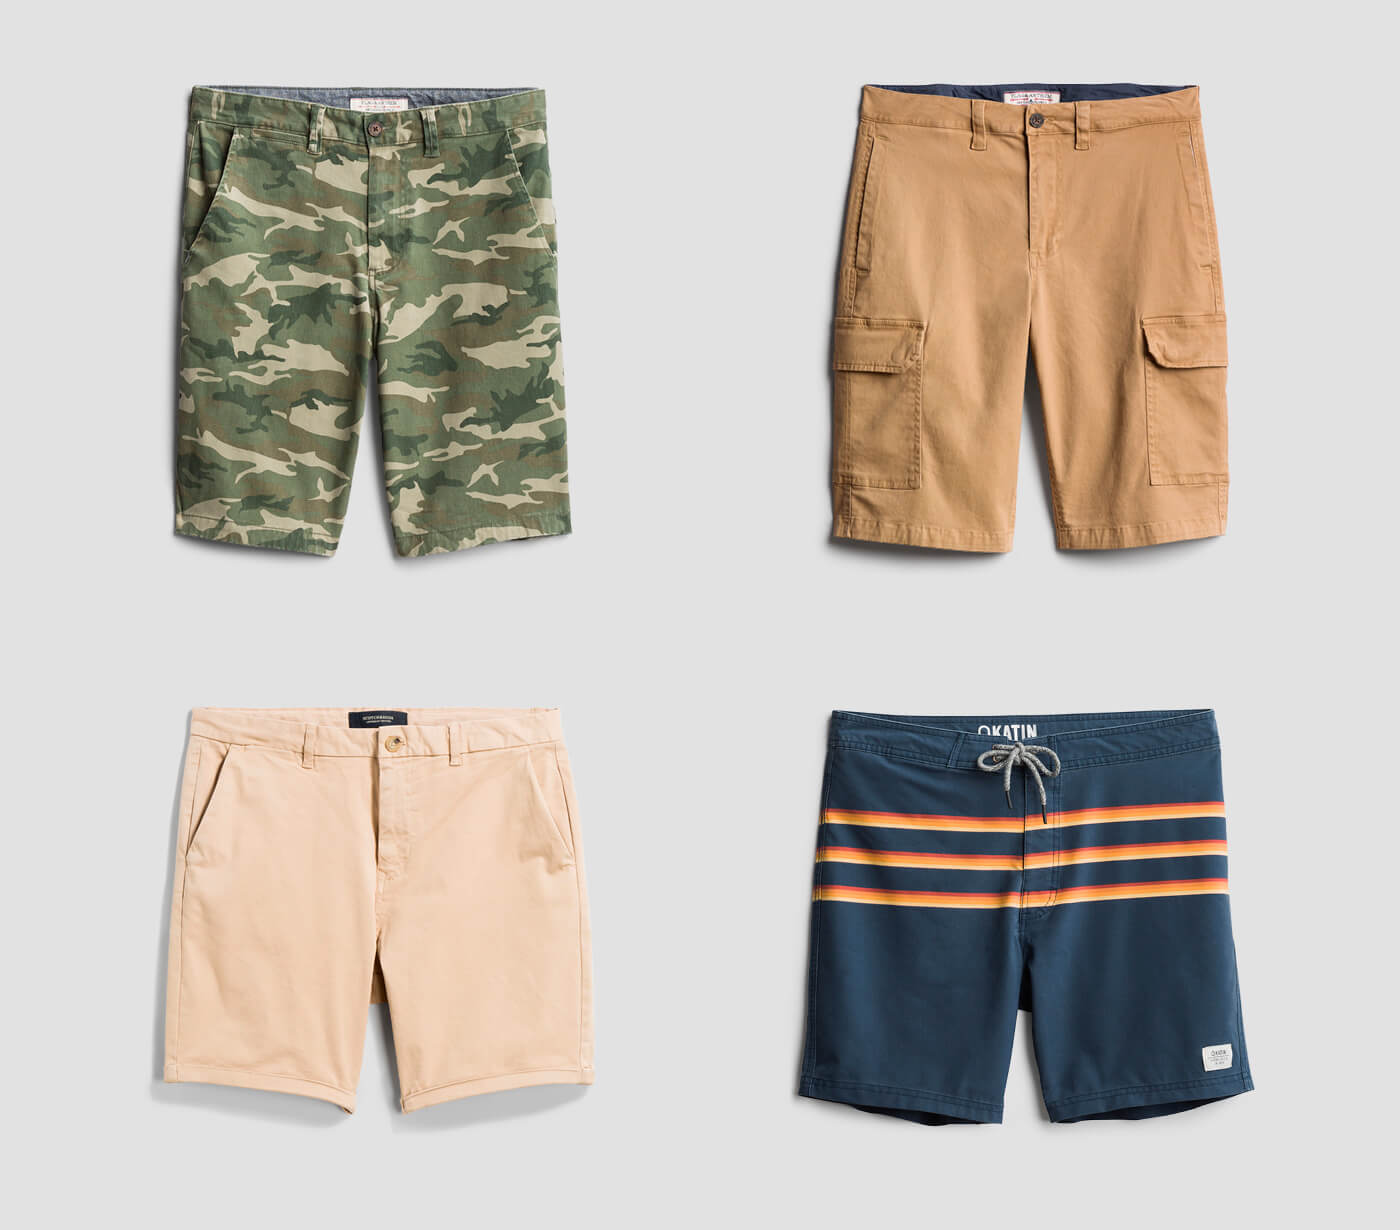 shorts for men's festival outfits